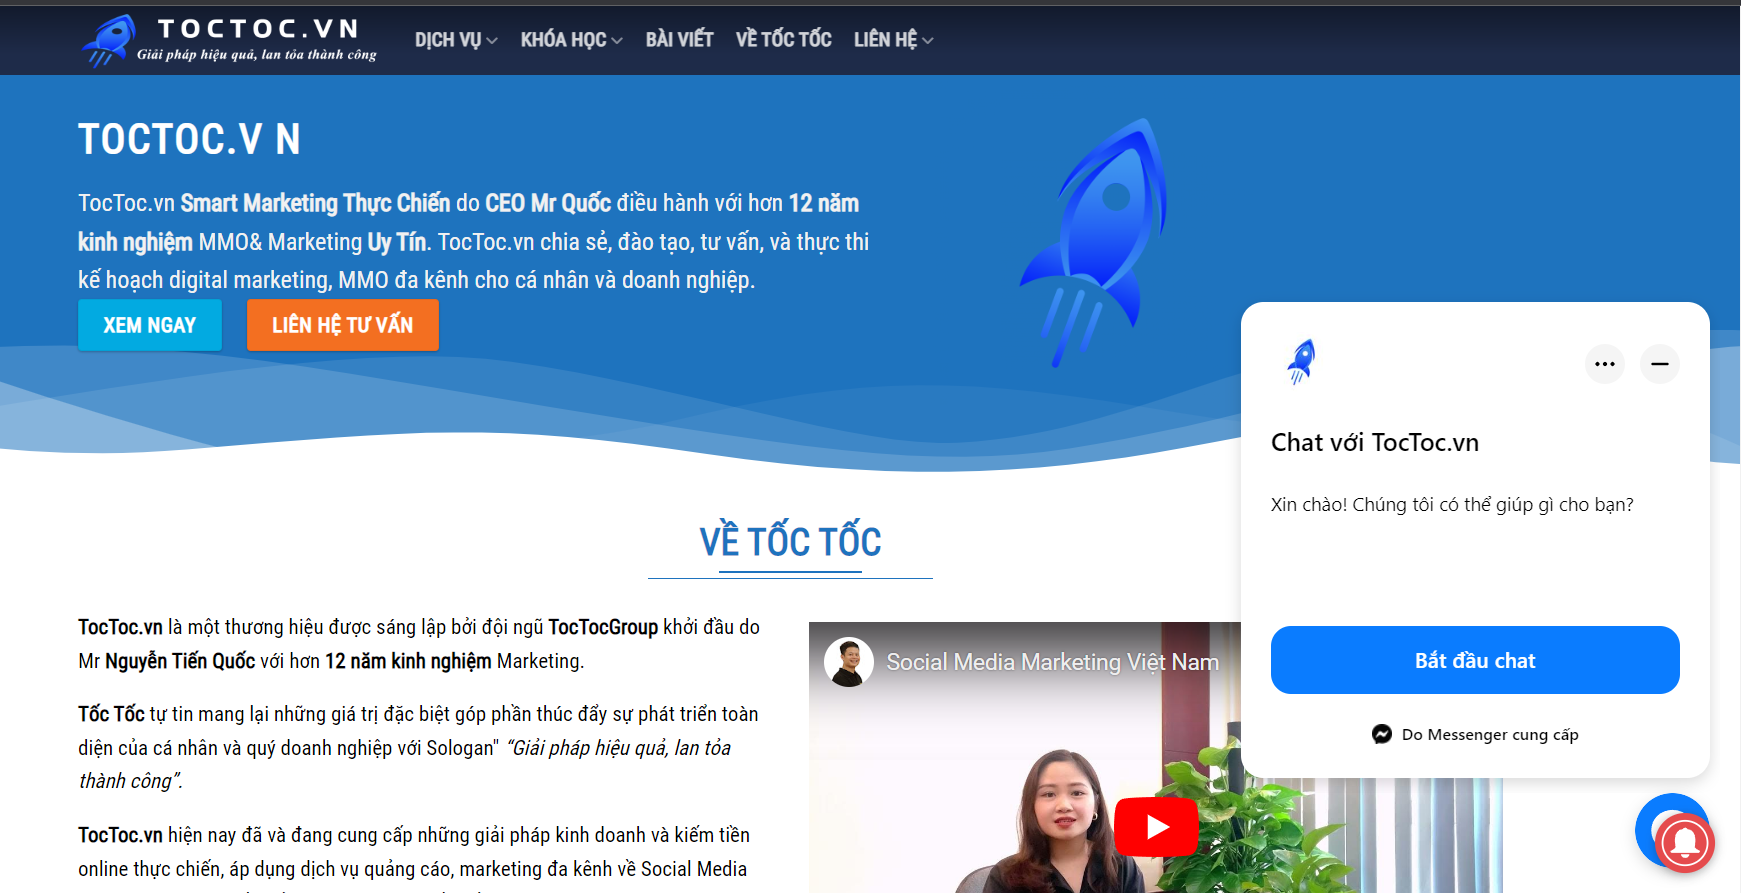 Website Dịch Vụ Toctoc.vn